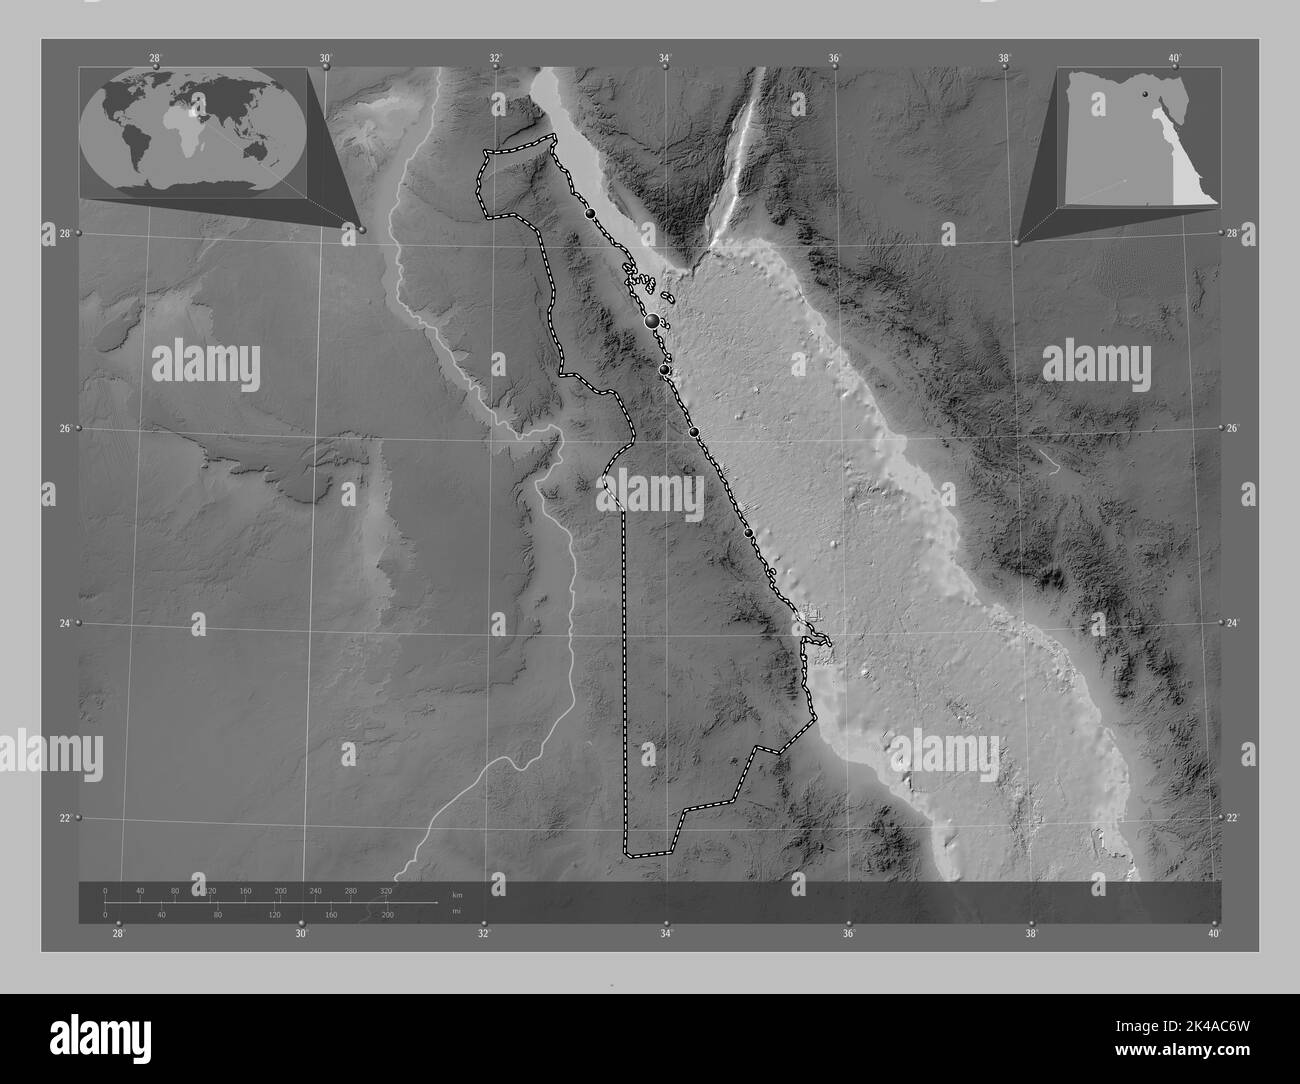 Al Bahr al Ahmar, governorate of Egypt. Grayscale elevation map with lakes and rivers. Locations of major cities of the region. Corner auxiliary locat Stock Photo